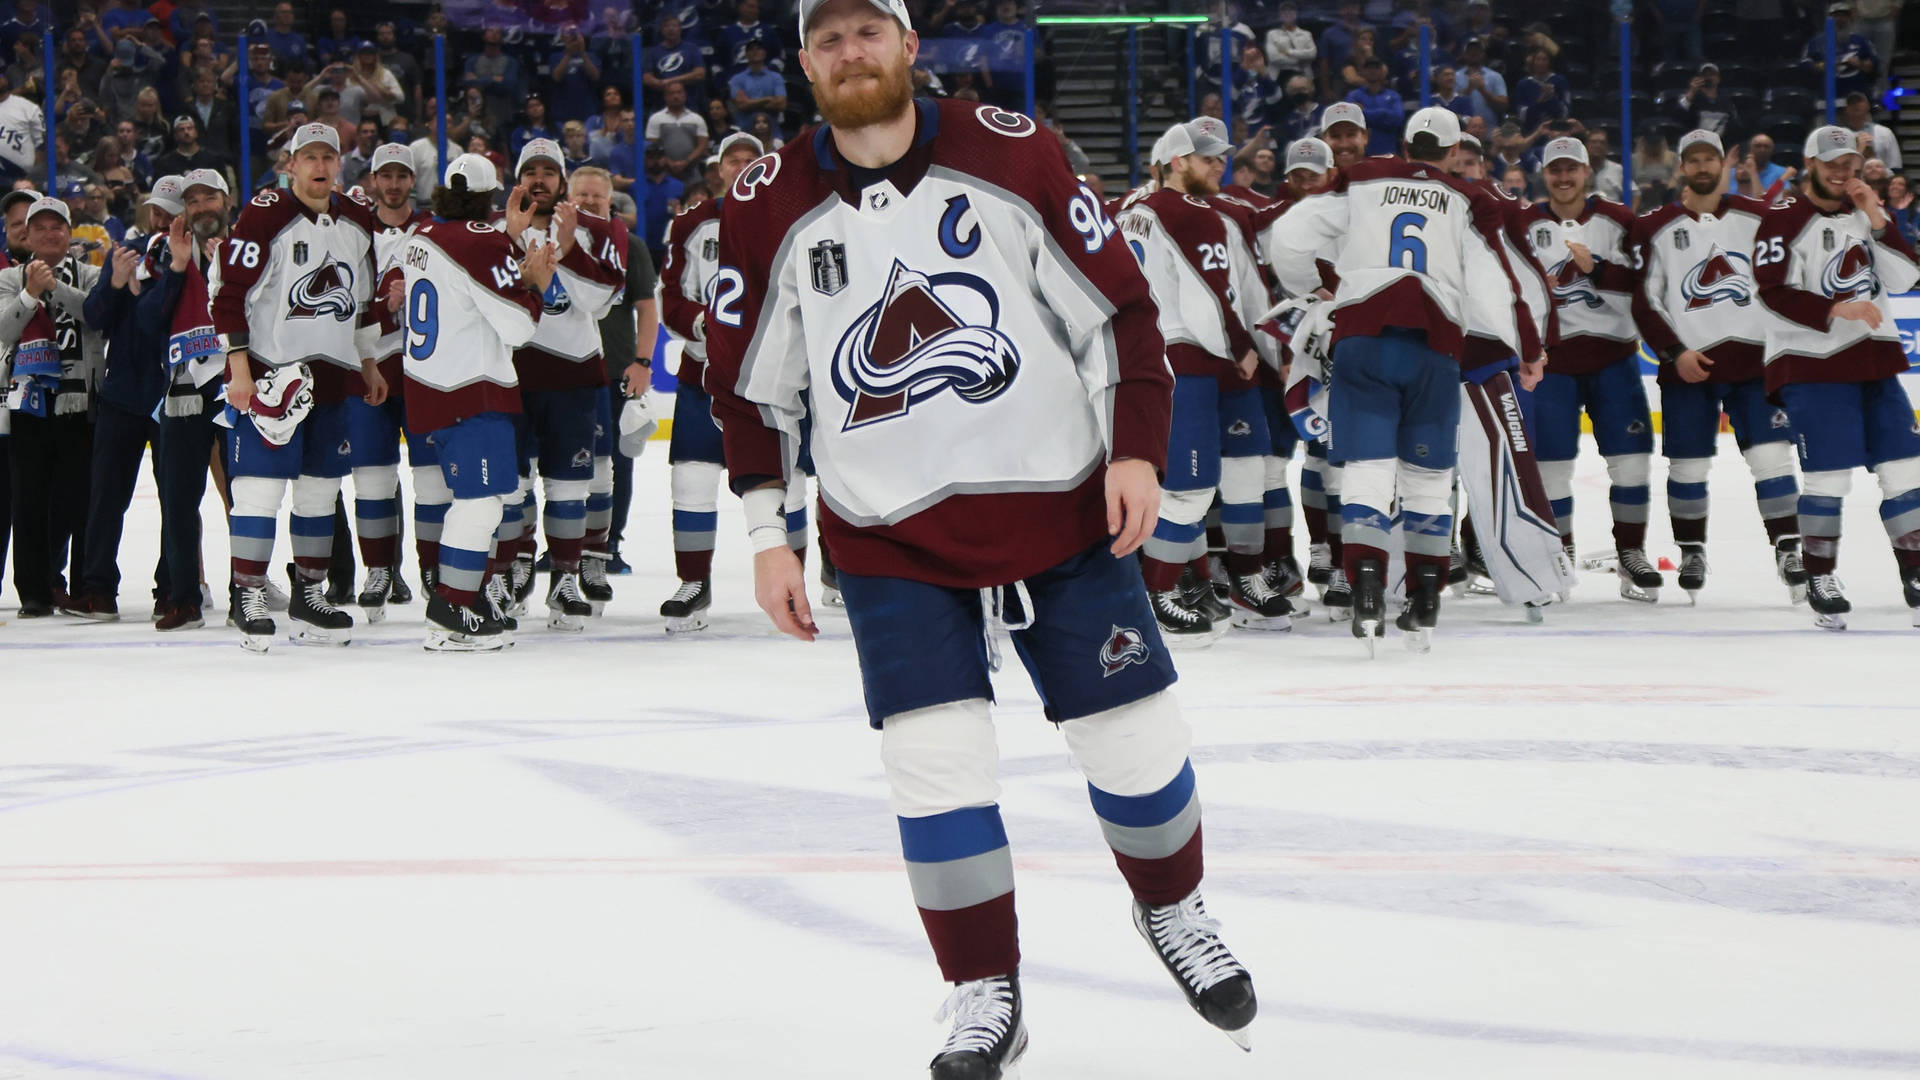 A detailed view of the jersey of captain Gabriel Landeskog of the